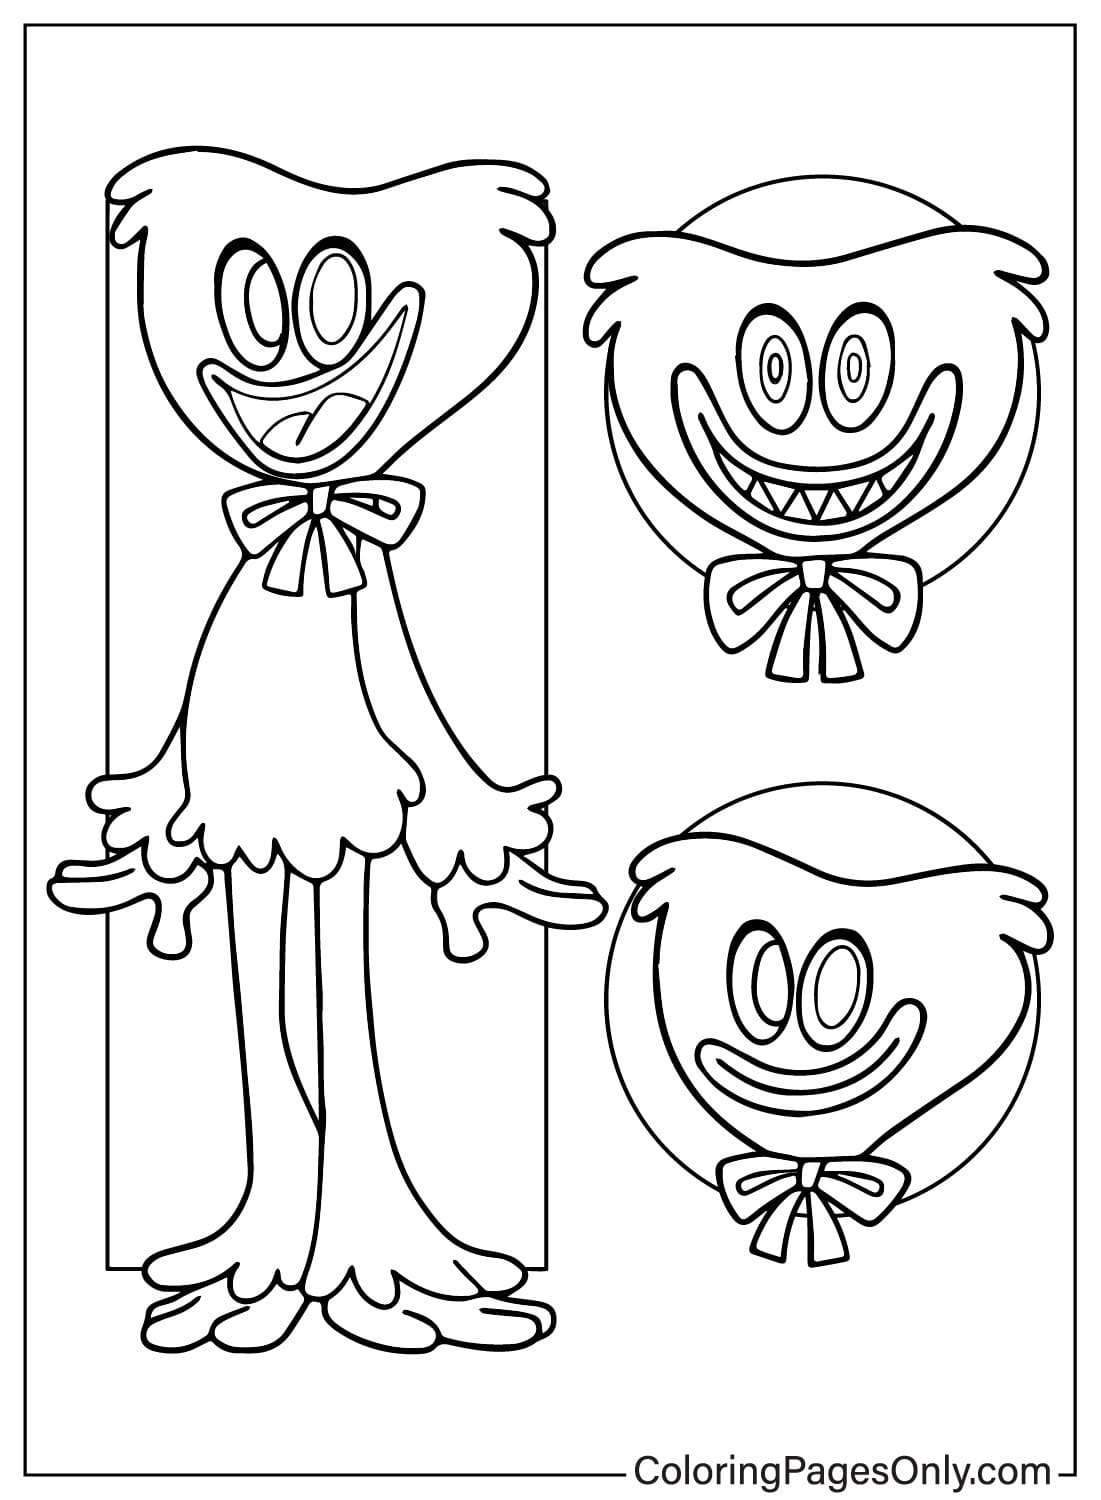 Huggy Wuggy Coloring Page to Print from Poppy Playtime